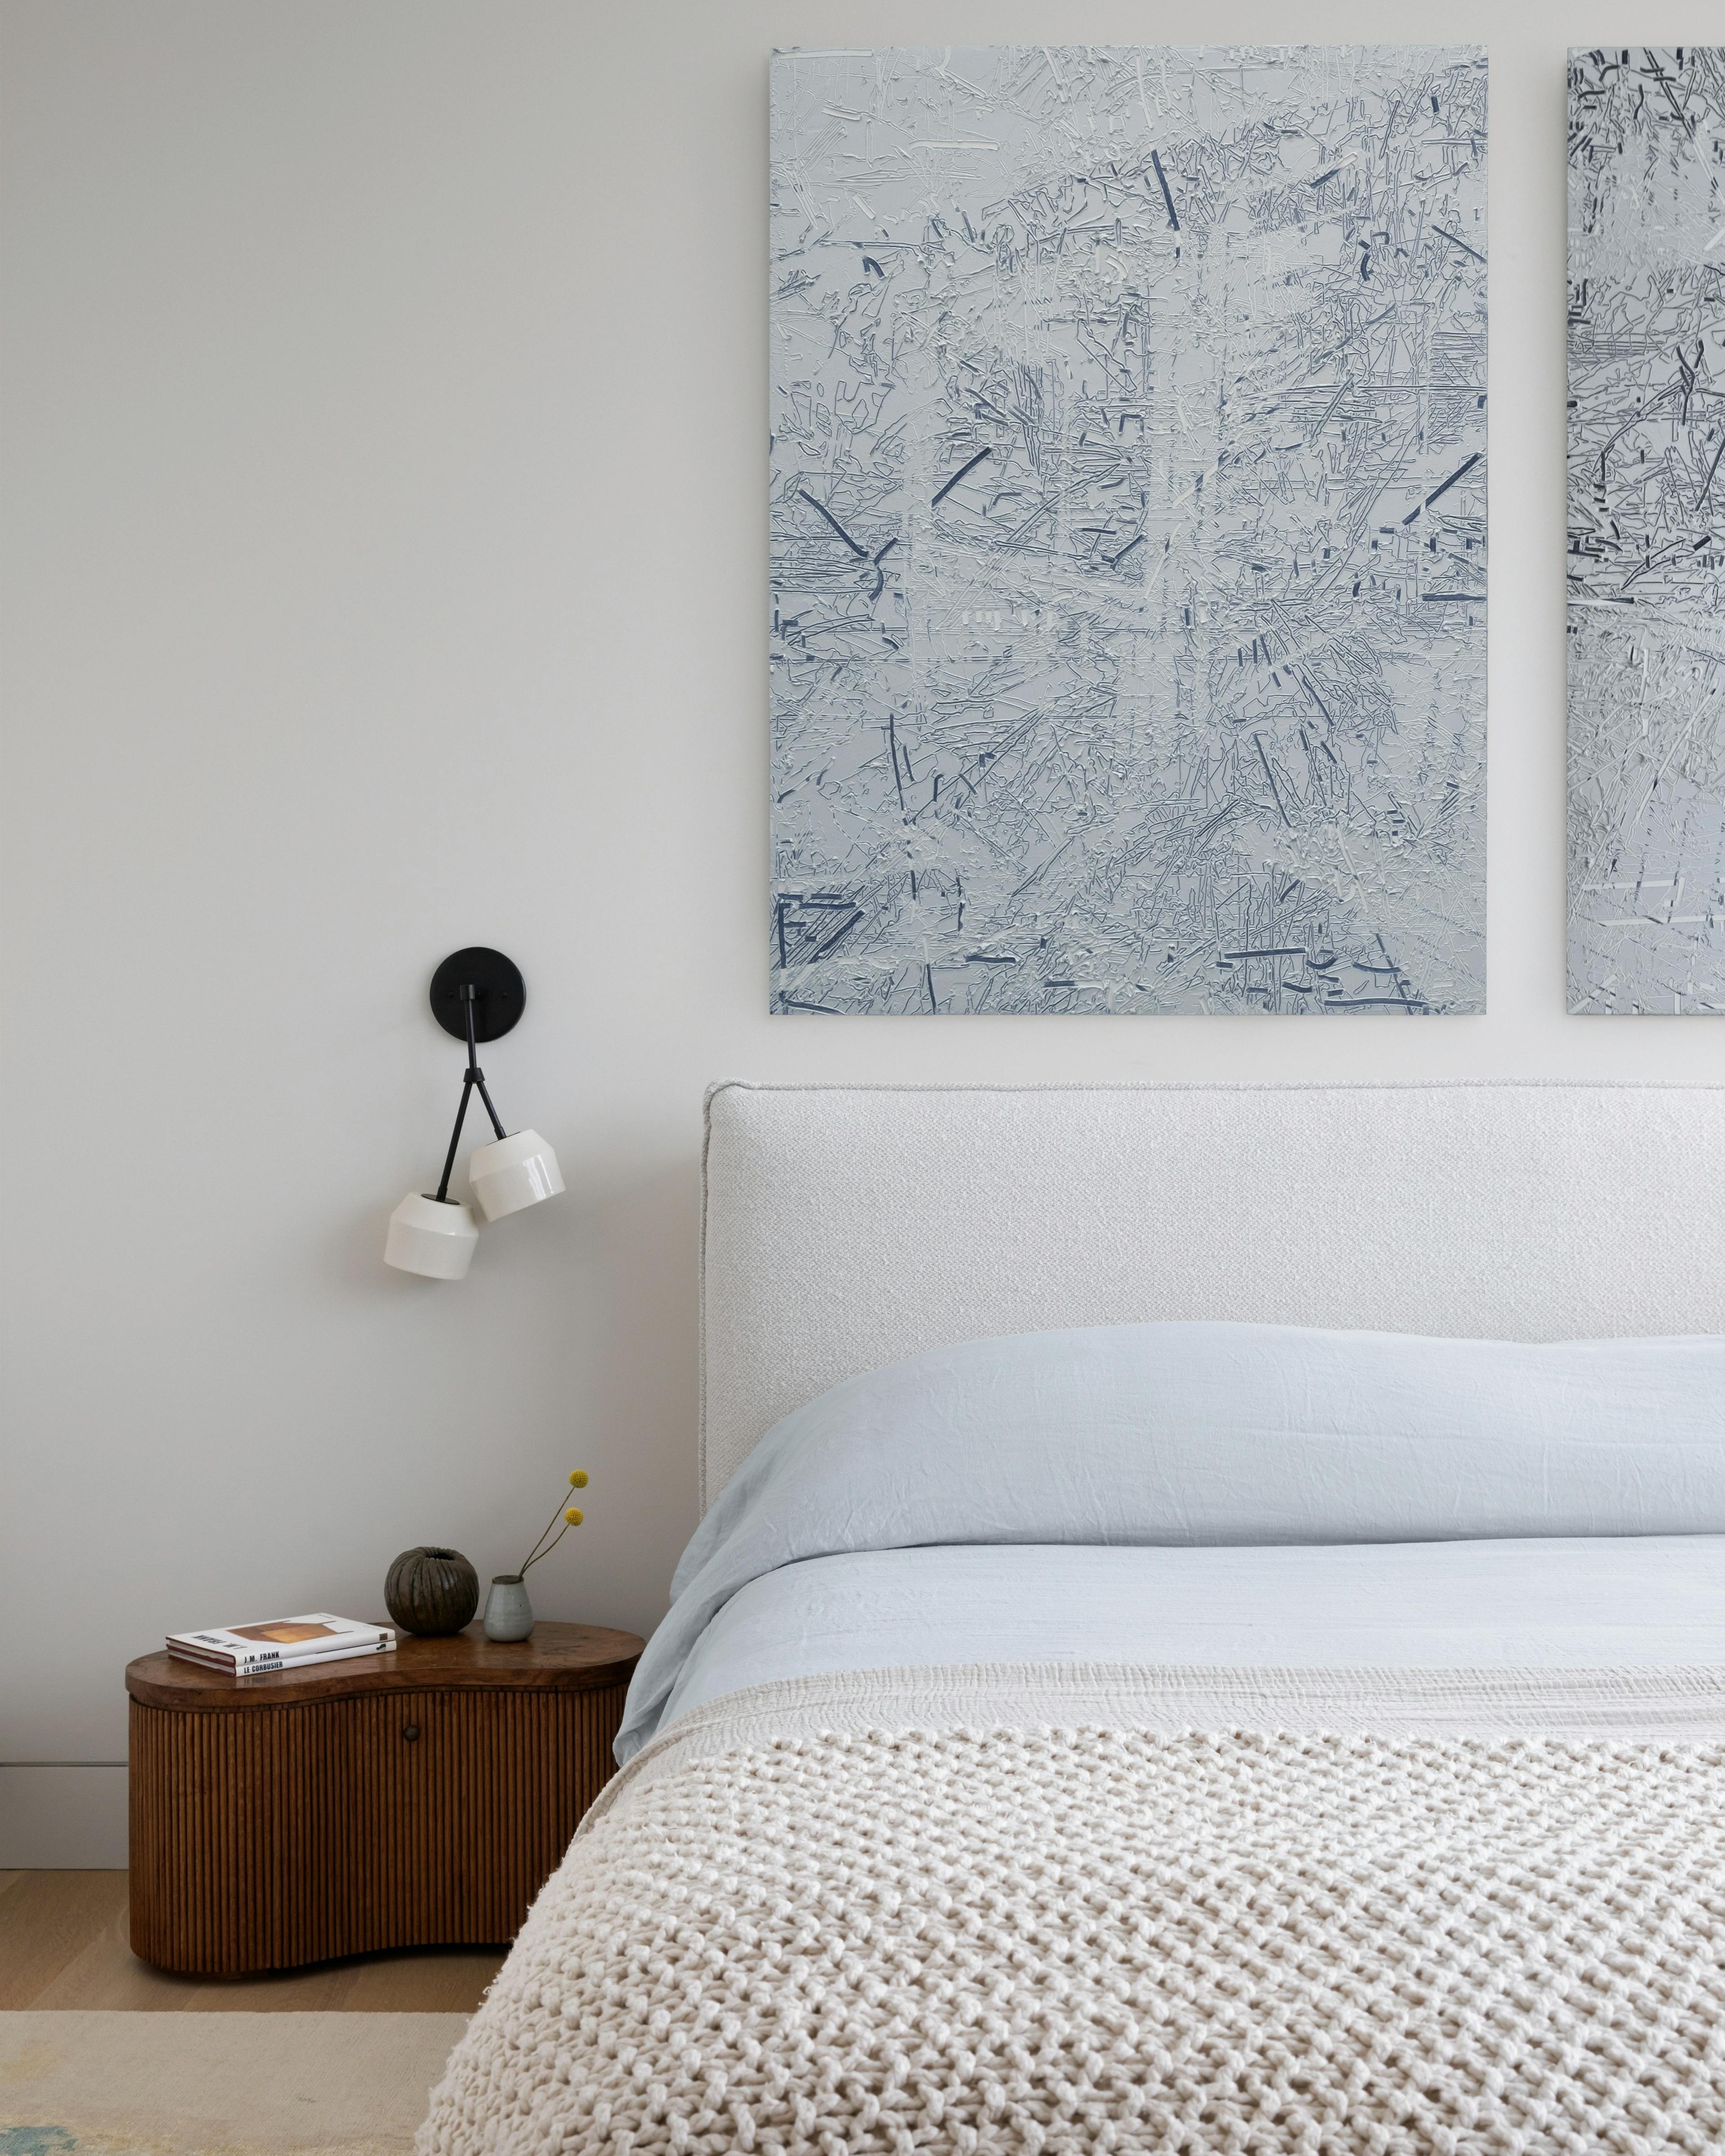 Textured gray, heavy impasto diptych by artist Blake Aaseby installed above a bed with a knitted beige blanket.